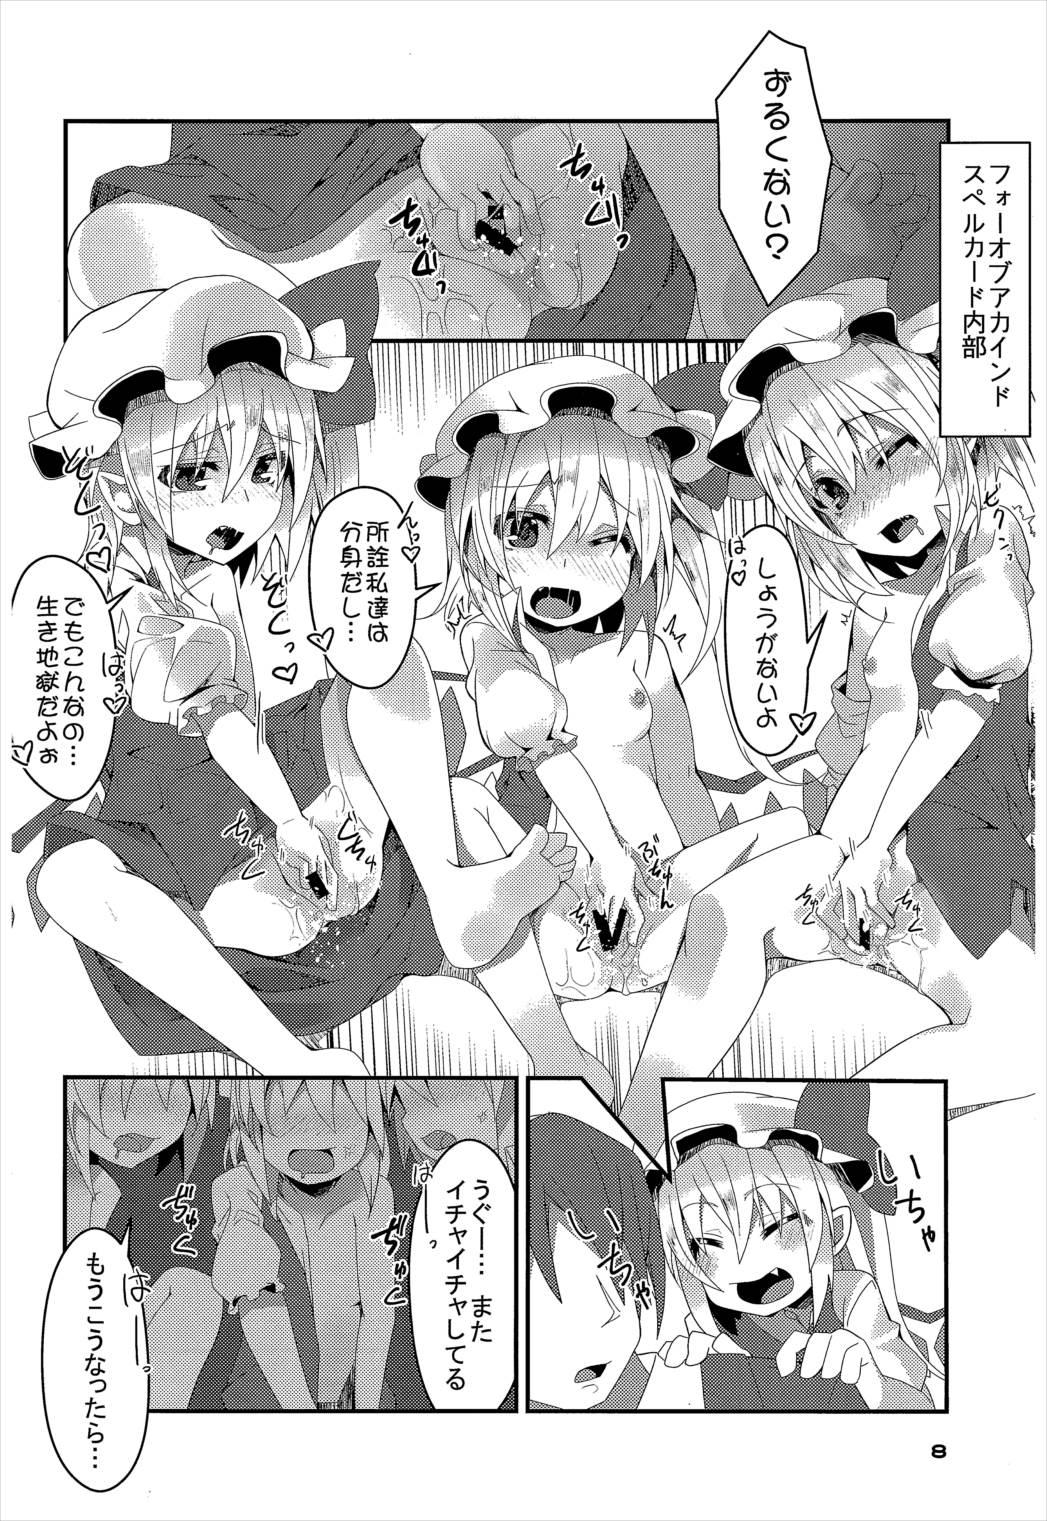 Italiano Four of Flan-chan no Gyakushuu - Touhou project Spooning - Page 7